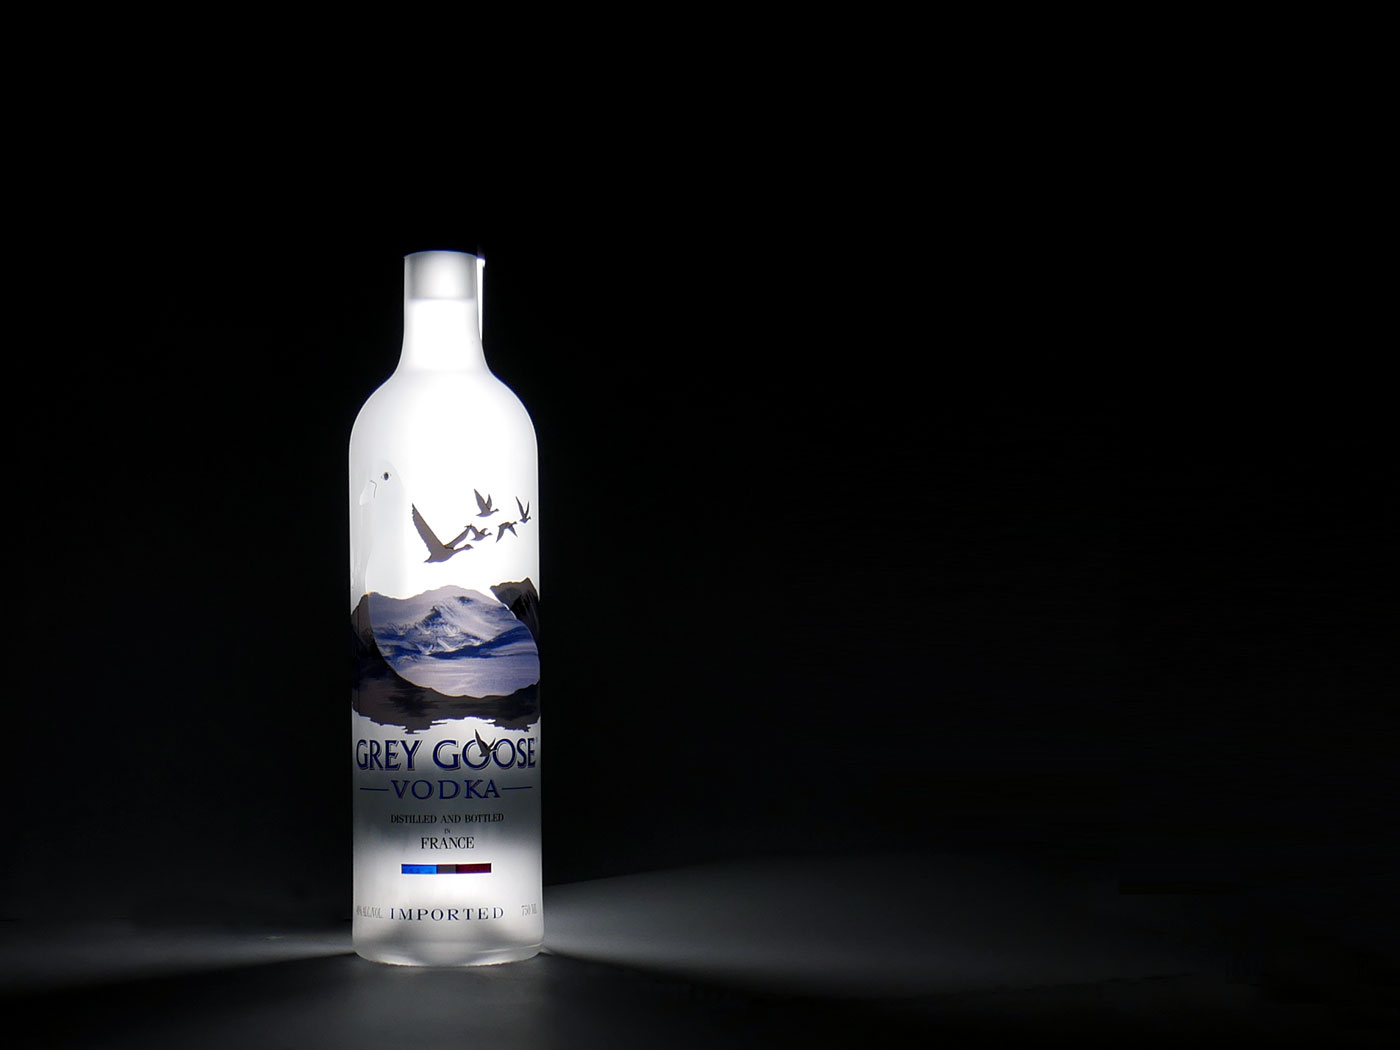 Grey Goose — Zero to the top in one year